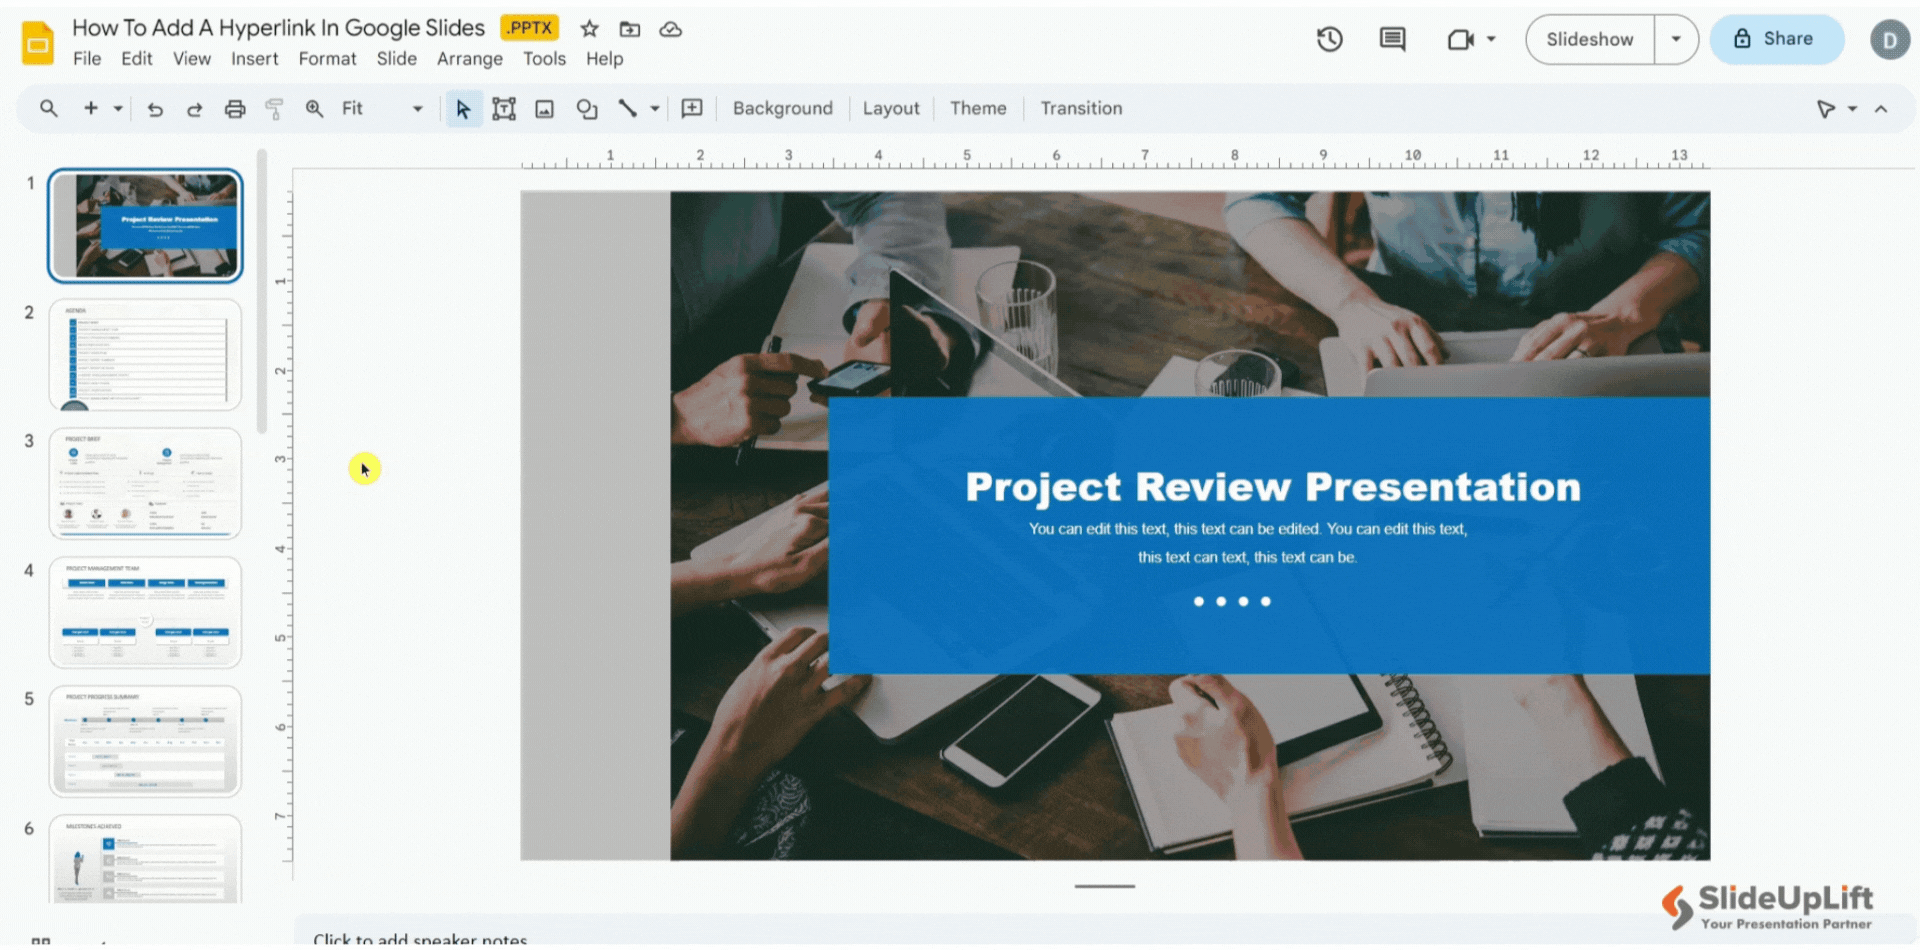 How To Hyperlink In Google Slides From The Menu